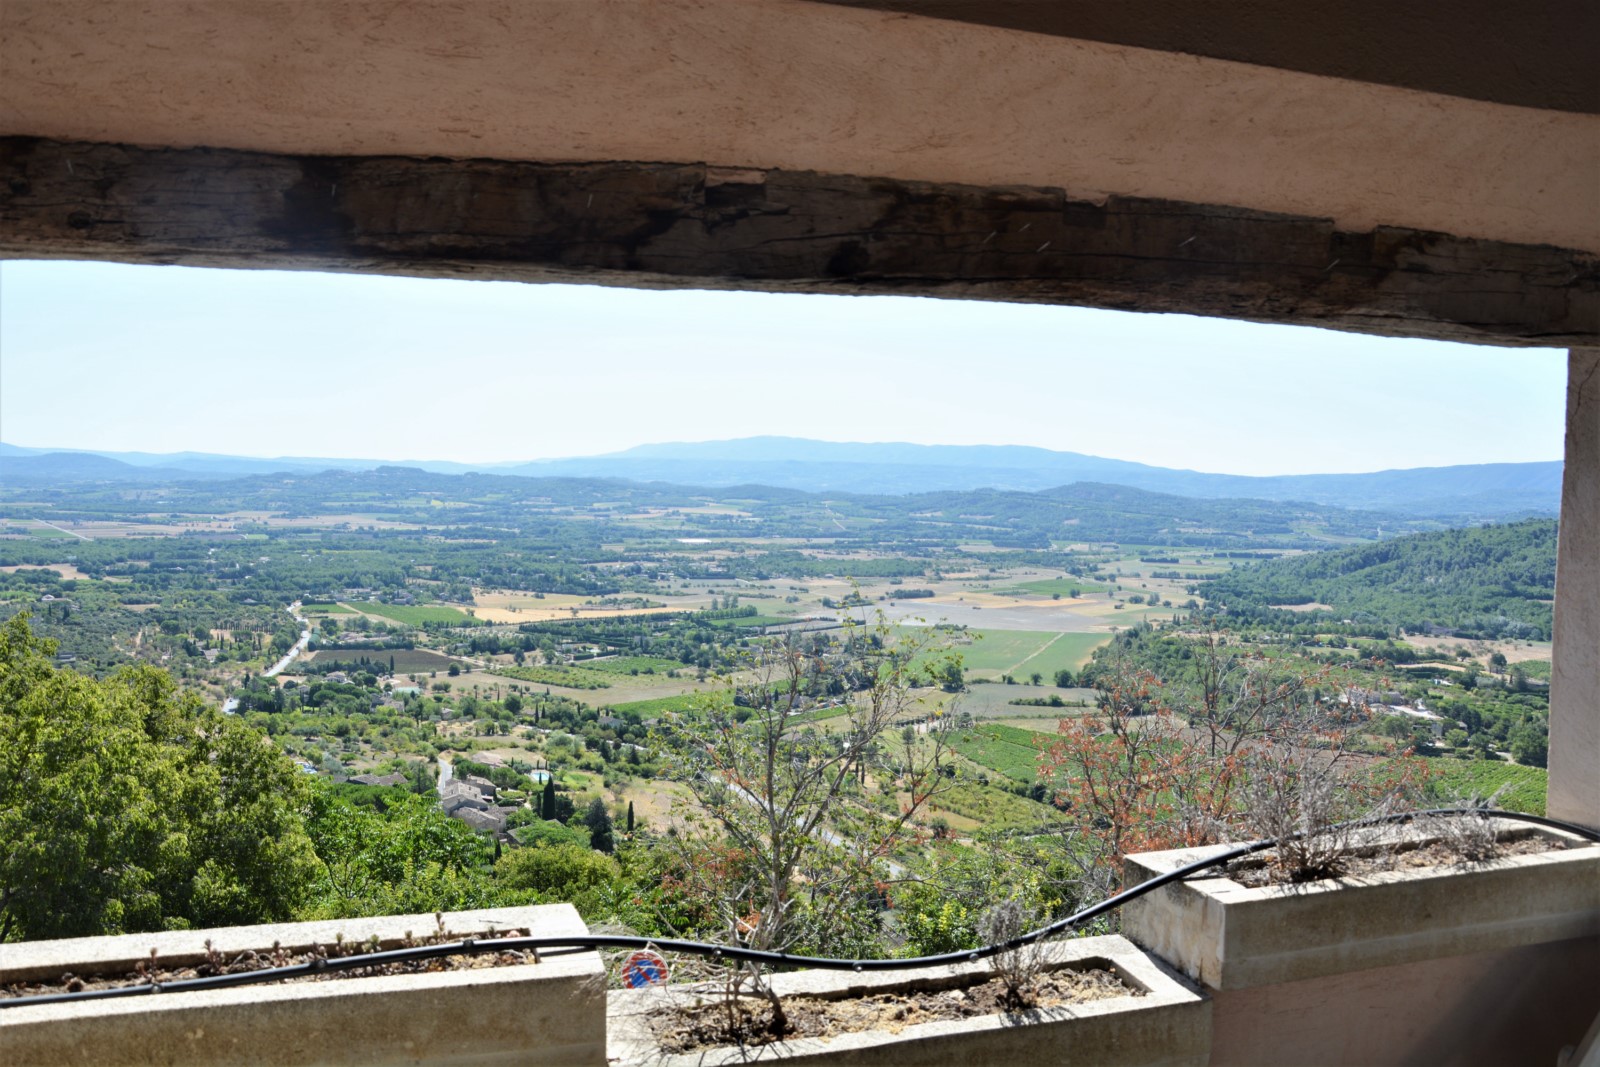 Luberon, lovely village in the centre of a listed village with a view on the Luberon plain